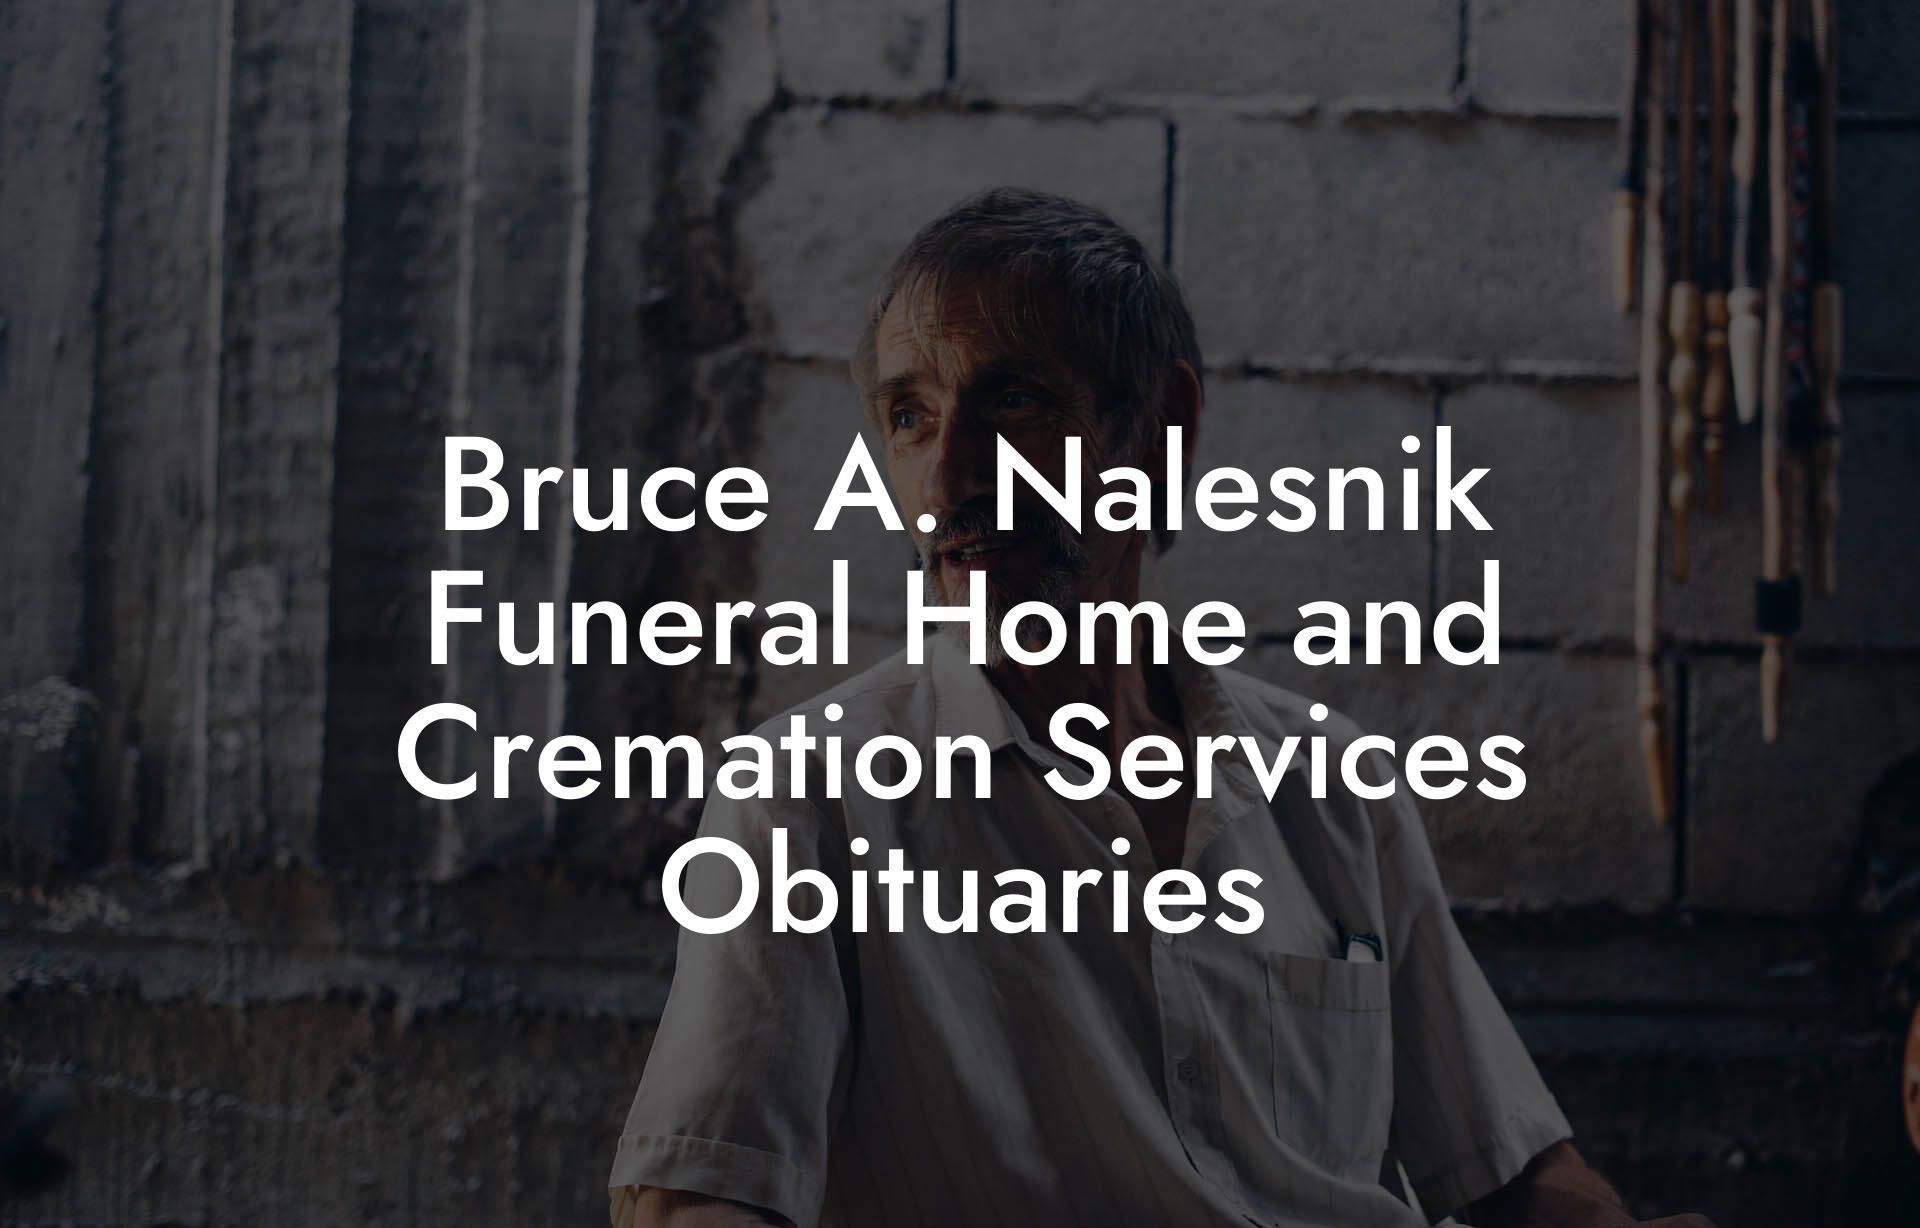 Bruce A. Nalesnik Funeral Home and Cremation Services Obituaries